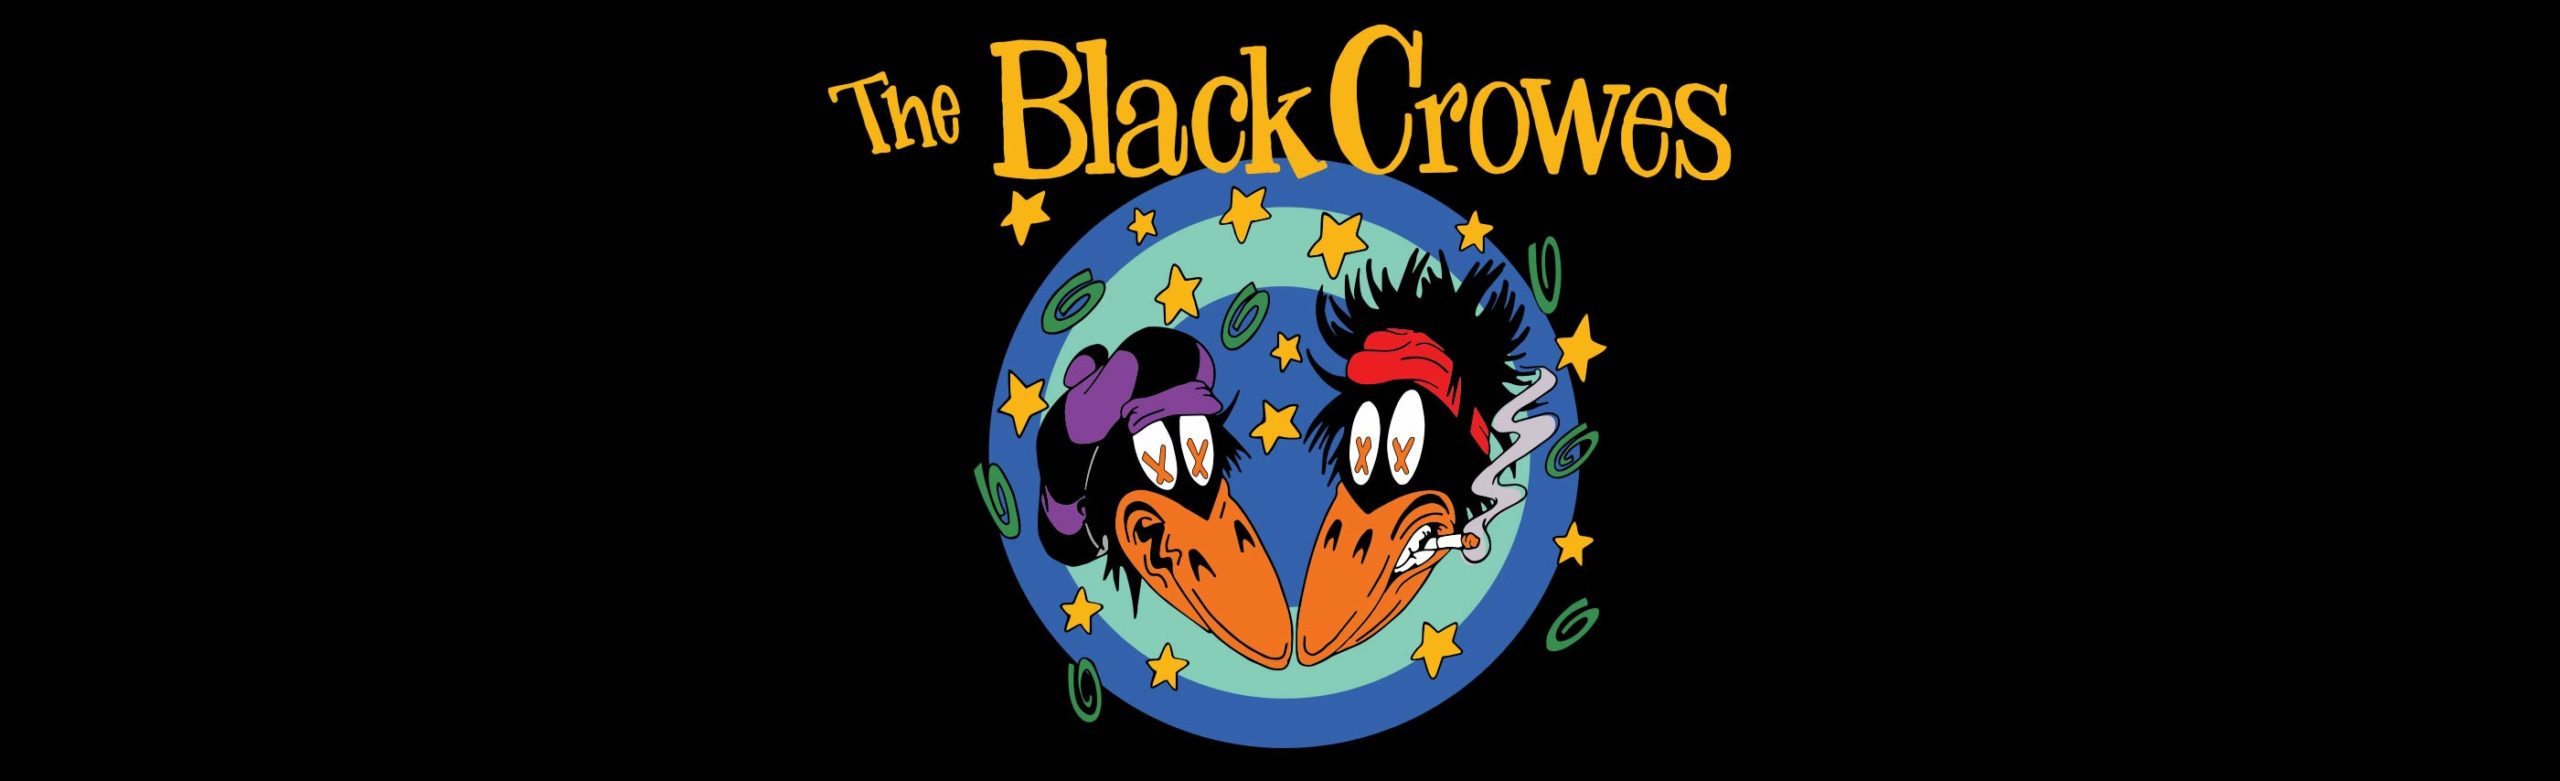 Event Info: The Black Crowes at KettleHouse Amphitheater 2022 Image